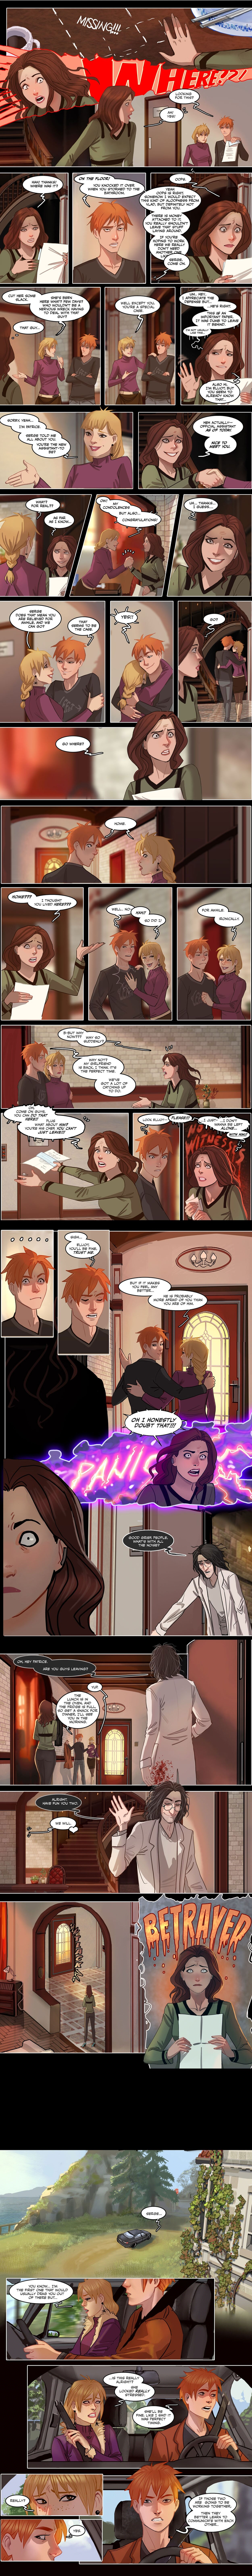 Blood Stain ch. 4 (ongoing) [Linda Sejic / Sigeel] 2